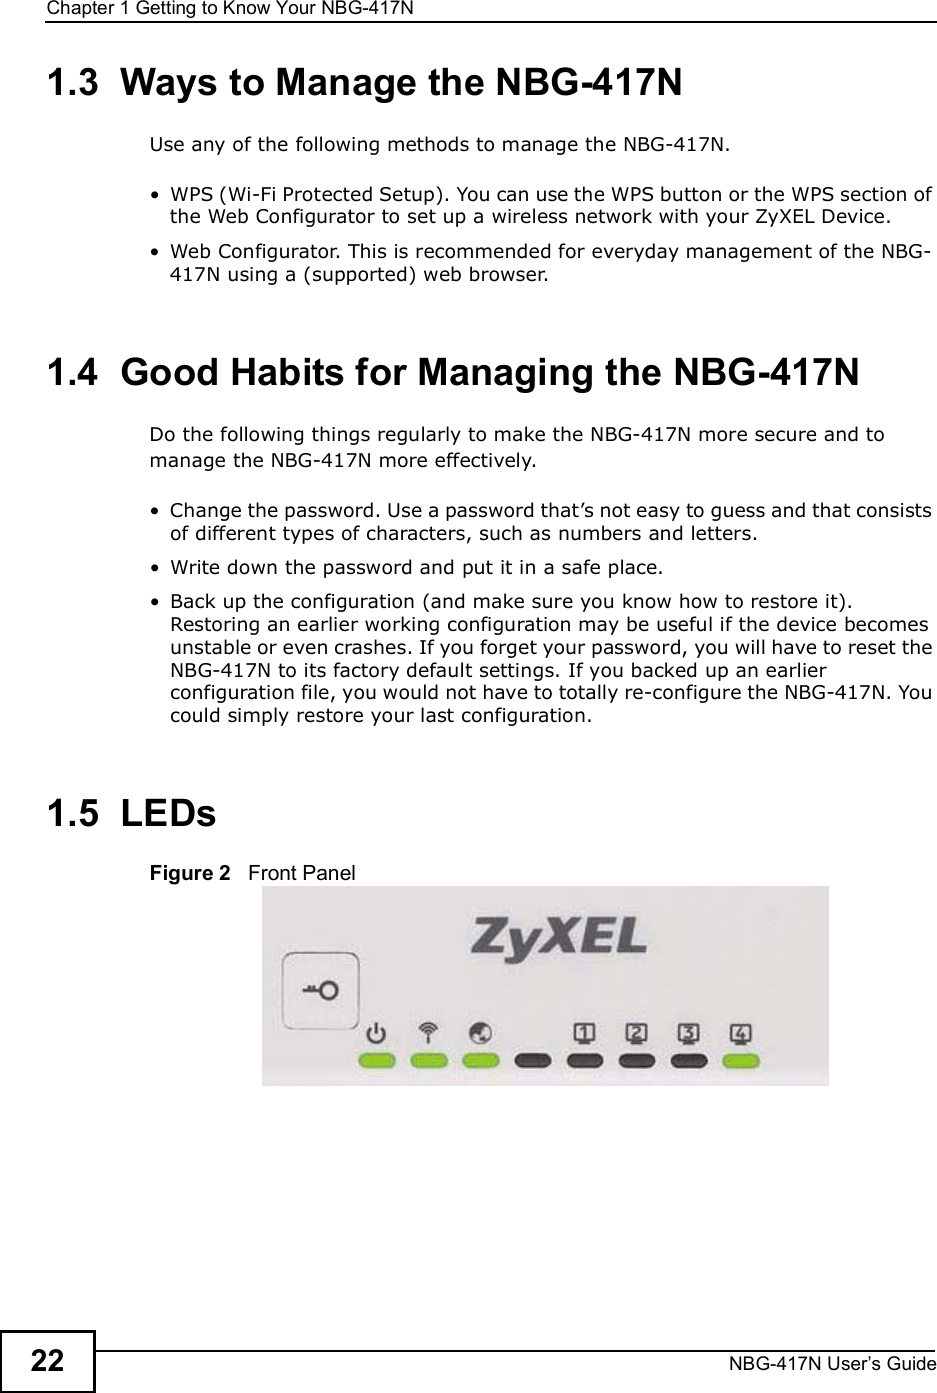 Chapter 1Getting to Know Your NBG-417NNBG-417N User s Guide221.3  Ways to Manage the NBG-417NUse any of the following methods to manage the NBG-417N. WPS (Wi-Fi Protected Setup). You can use the WPS button or the WPS section of the Web Configurator to set up a wireless network with your ZyXEL Device. Web Configurator. This is recommended for everyday management of the NBG-417N using a (supported) web browser.1.4  Good Habits for Managing the NBG-417NDo the following things regularly to make the NBG-417N more secure and to manage the NBG-417N more effectively. Change the password. Use a password that!s not easy to guess and that consists of different types of characters, such as numbers and letters. Write down the password and put it in a safe place. Back up the configuration (and make sure you know how to restore it). Restoring an earlier working configuration may be useful if the device becomes unstable or even crashes. If you forget your password, you will have to reset the NBG-417N to its factory default settings. If you backed up an earlier configuration file, you would not have to totally re-configure the NBG-417N. You could simply restore your last configuration.1.5  LEDsFigure 2   Front Panel